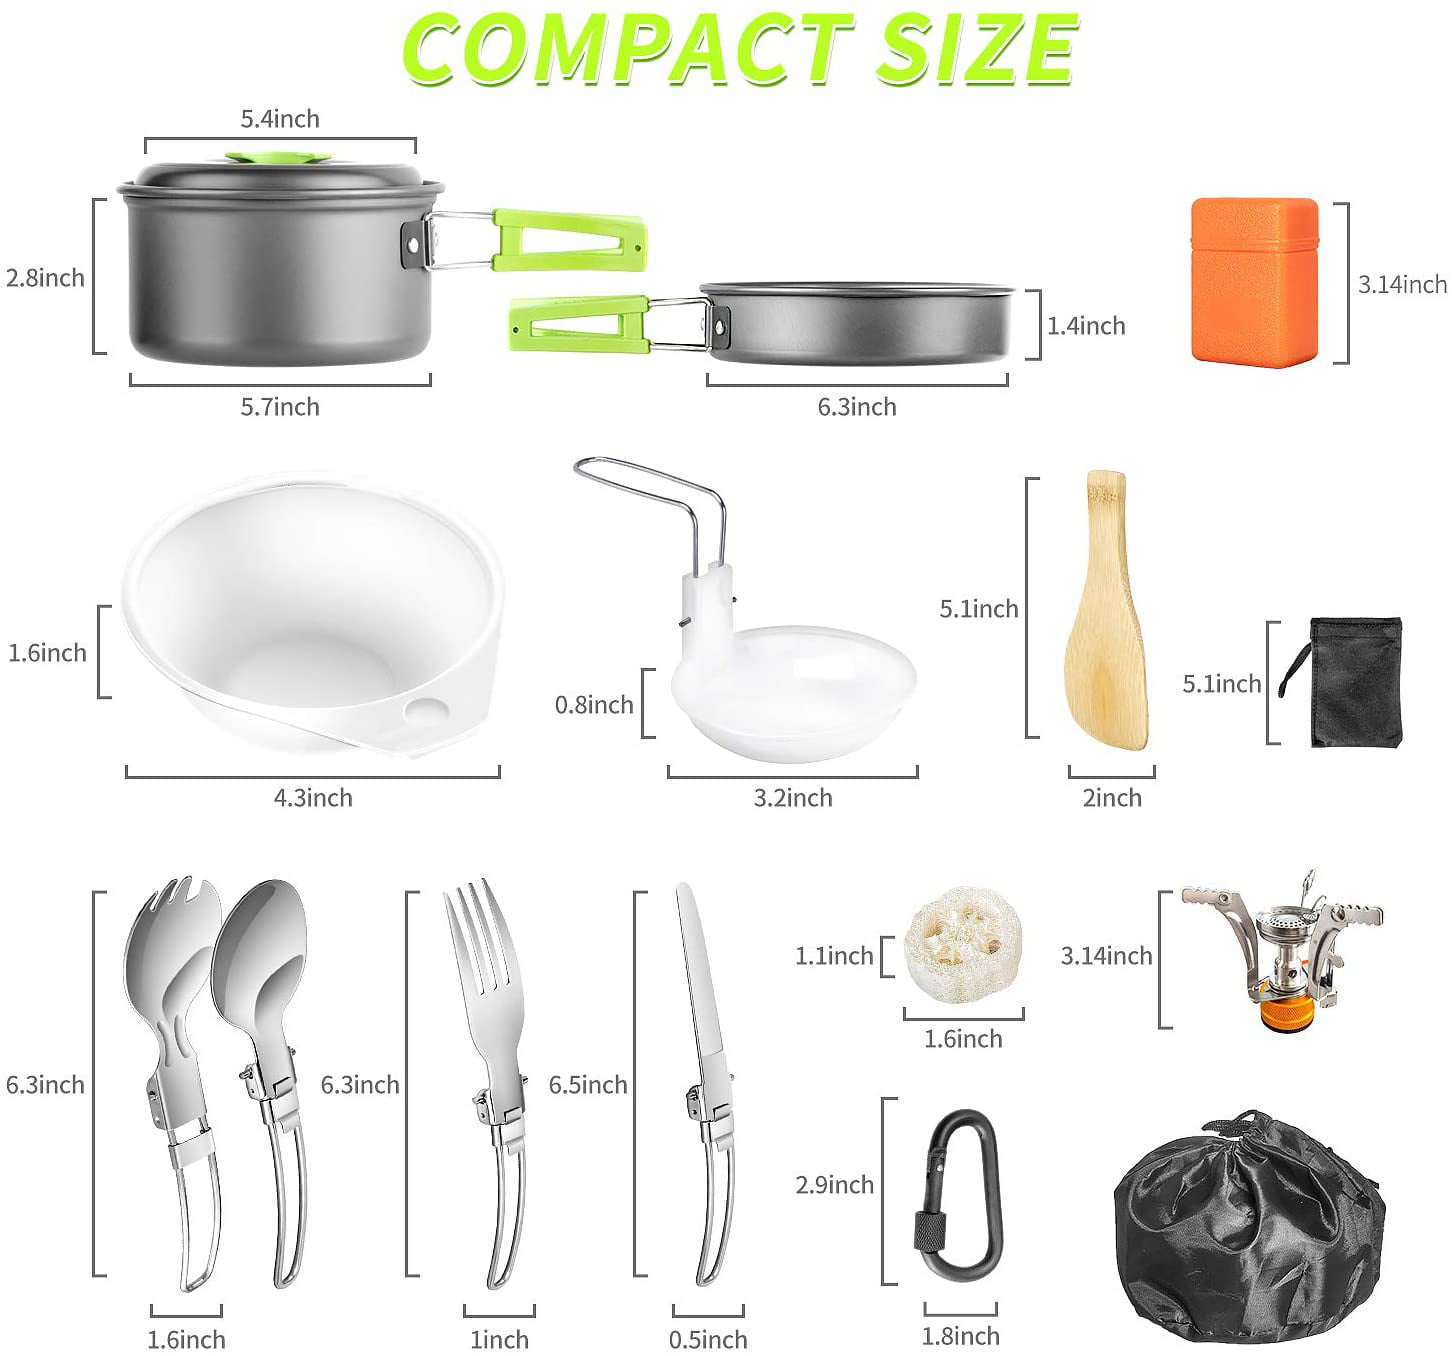 16 Pcs Camping Cookware Set Stove Canister Stand Tripod Outdoor Hiking Picnic Non-Stick Cooking Backpacking with Folding Knife and Fork Set Mess Kit